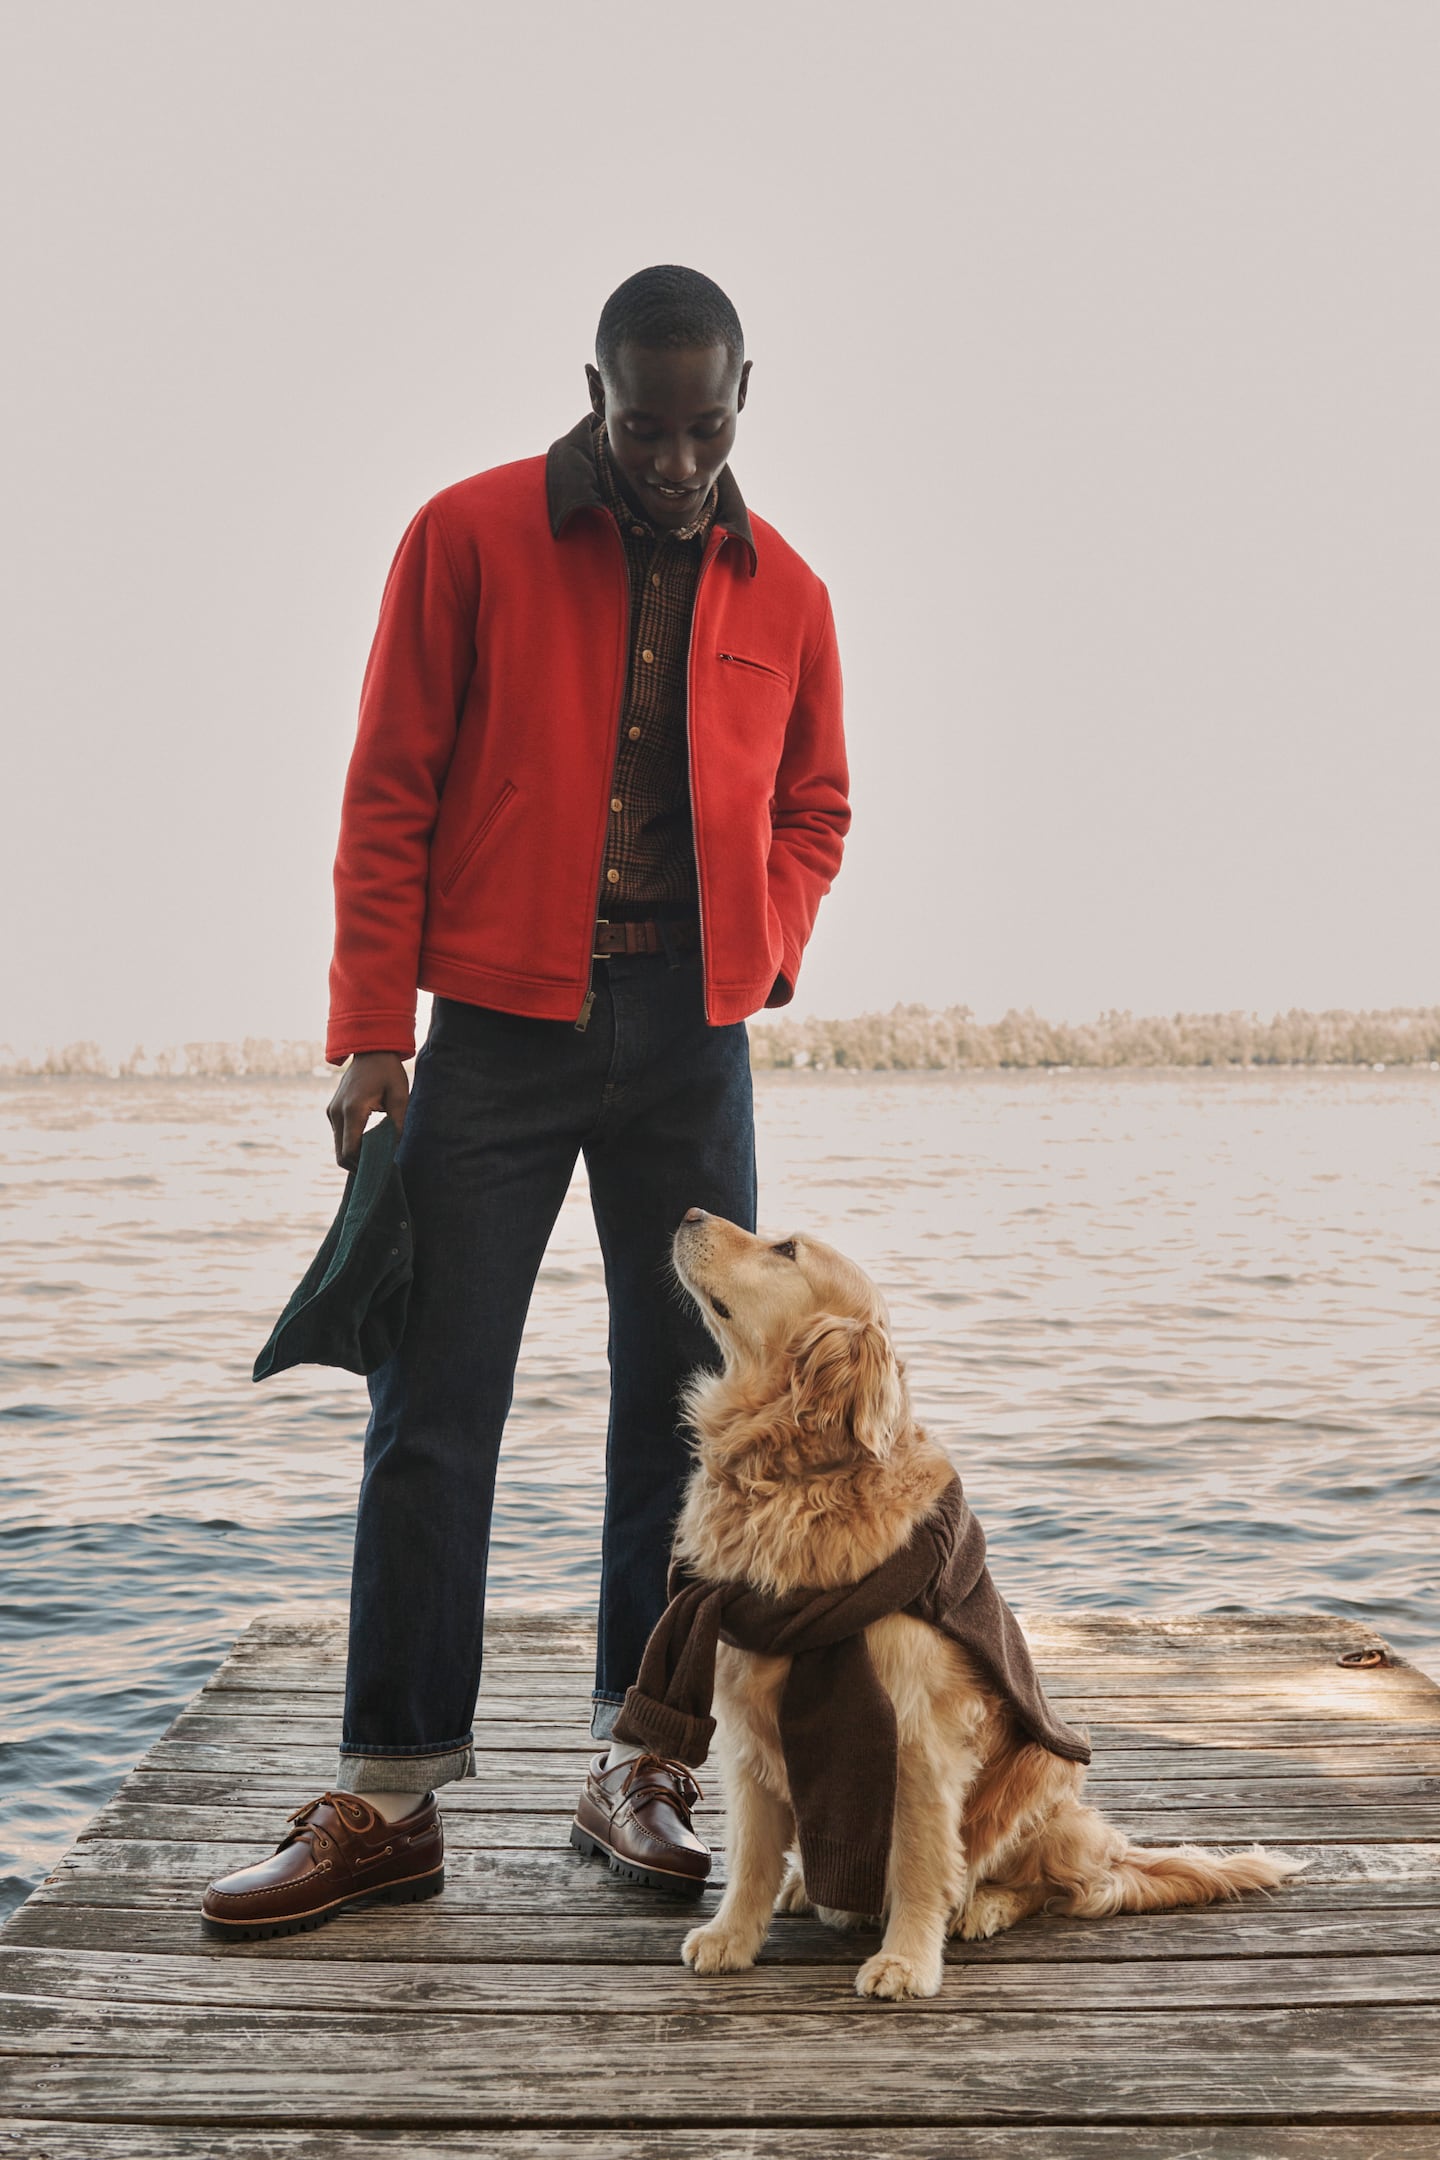 Man in red jacket stands on a dock, looking down to a golden retriever with a sweater tied around its body.